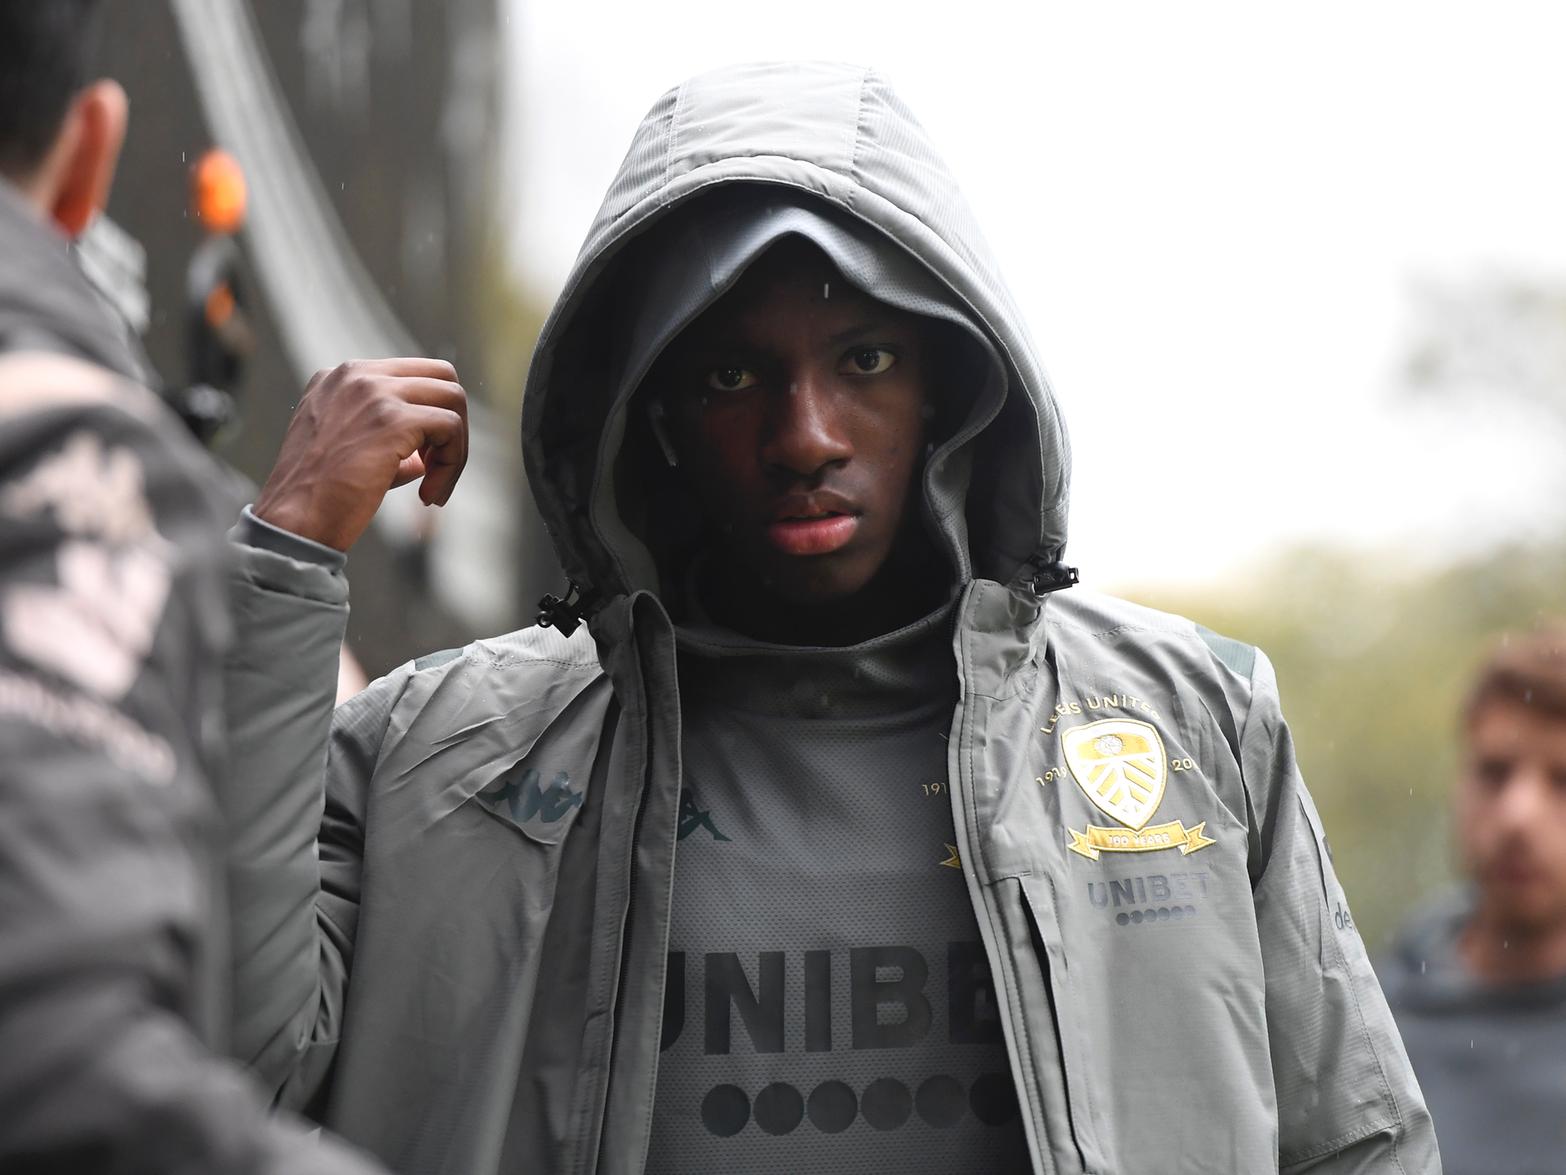 Senior figures from Arsenal were said to have been disappointed at missing another opportunity to assess Eddie Nketiah last weekend, after the Leeds loanee was again benched for the 0-0 draw against Sheffield Wednesday. (The Athletic)